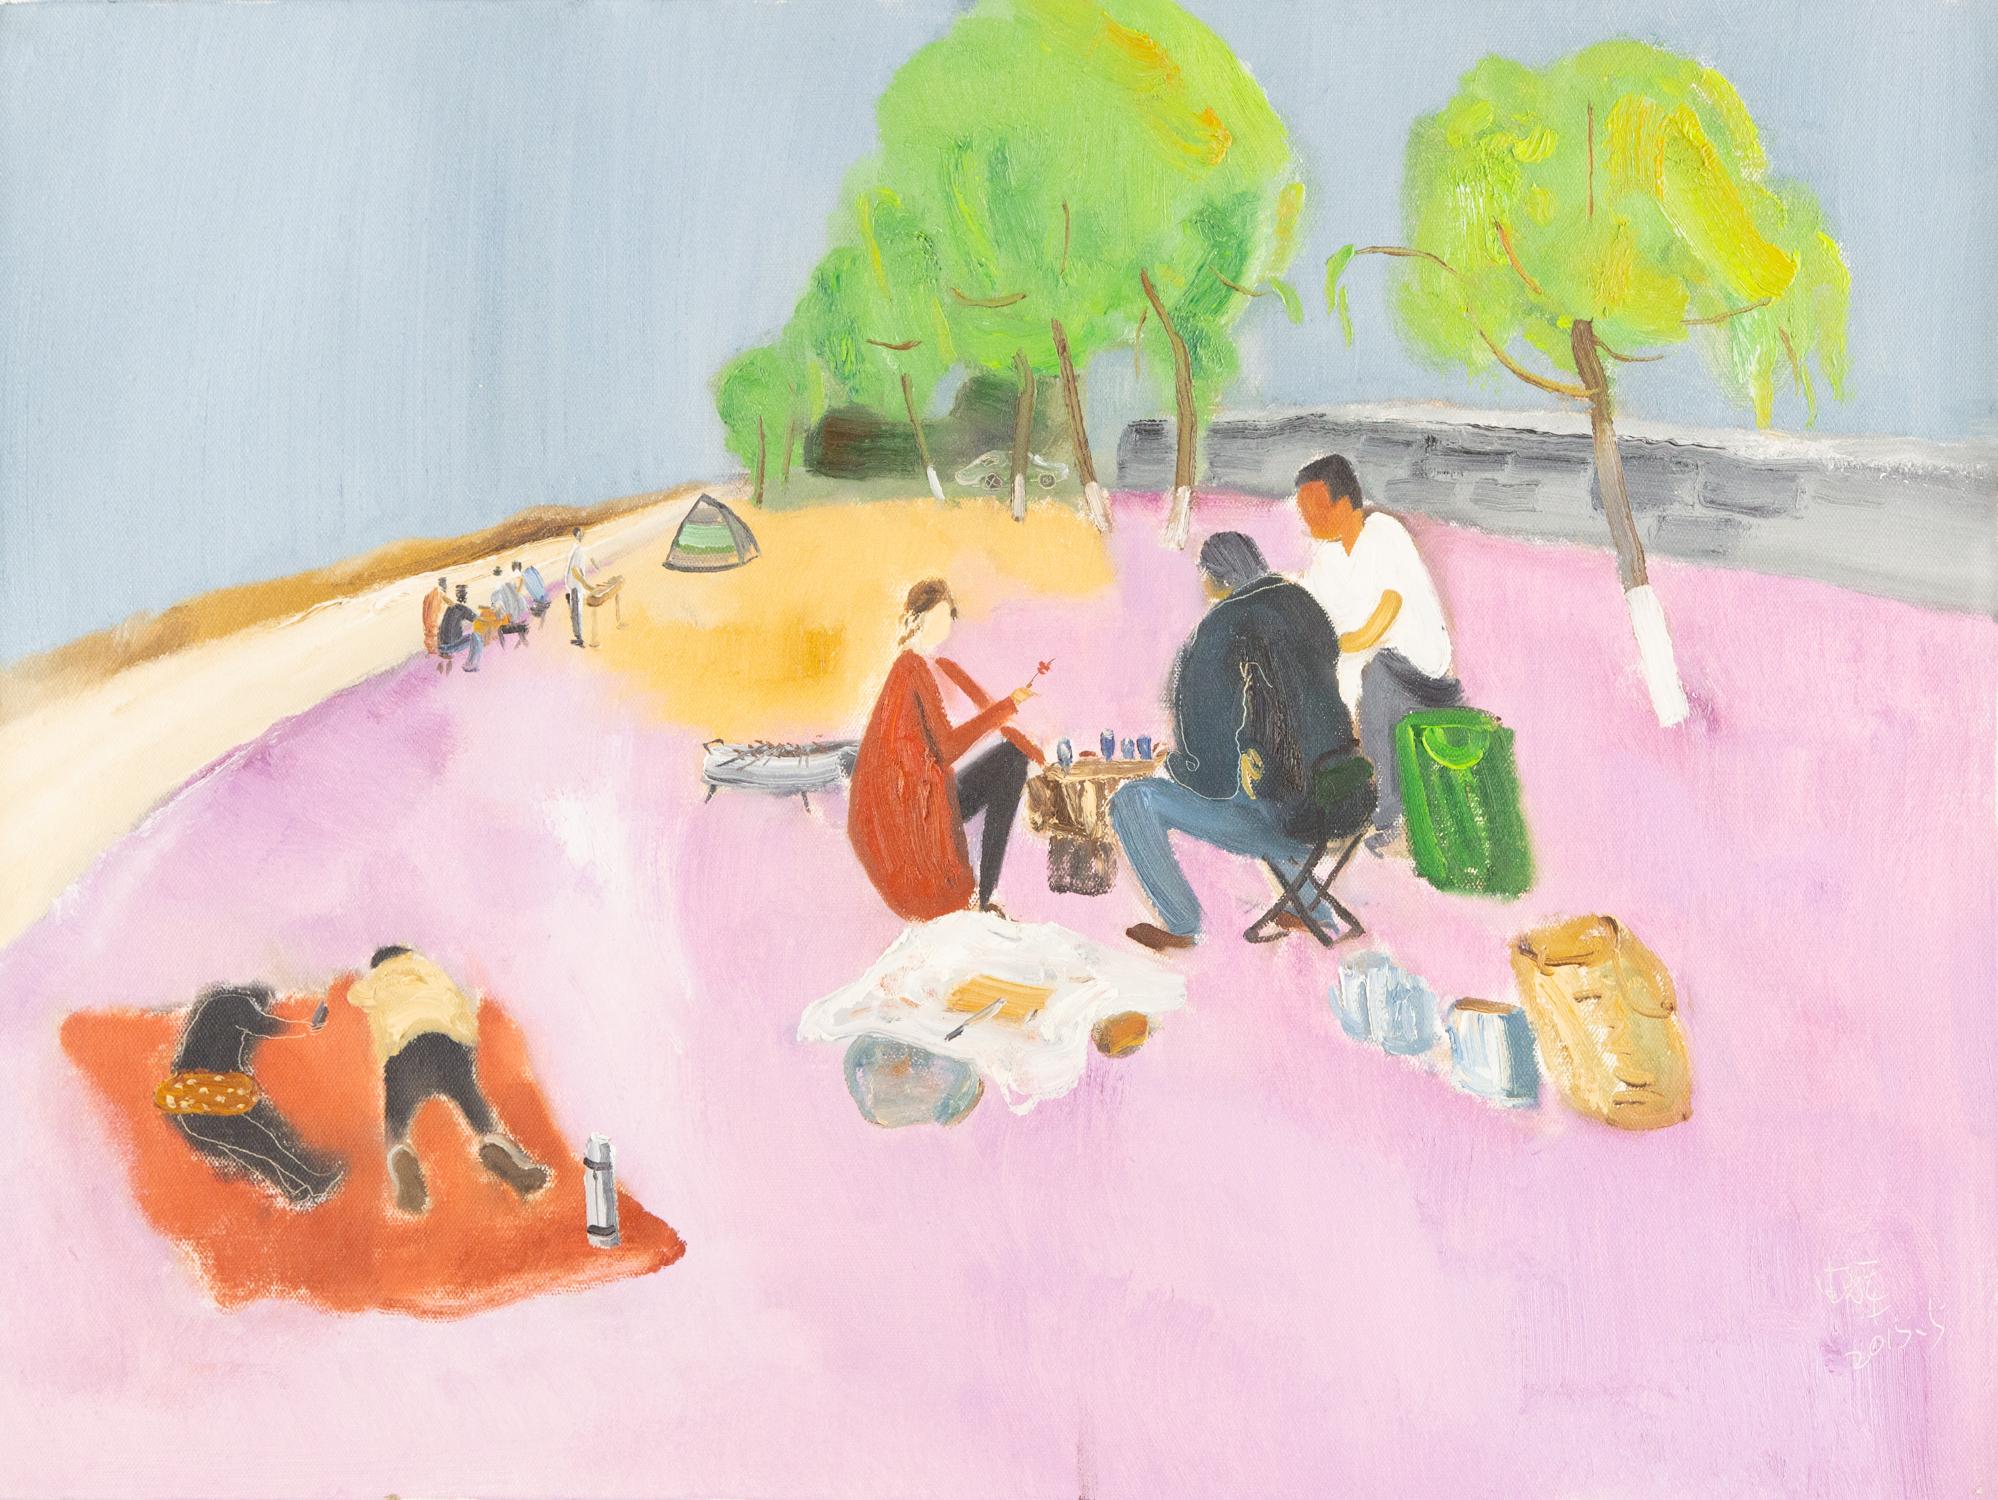 Title: Picnic Day In Park
Medium: Oil on canvas
Size: 23 x 31 inches
Frame: Framing options available!
Condition: The painting appears to be in excellent condition.
Note: This painting is unstretched
Year: 2015
Artist: Sheng Hui
Signature: